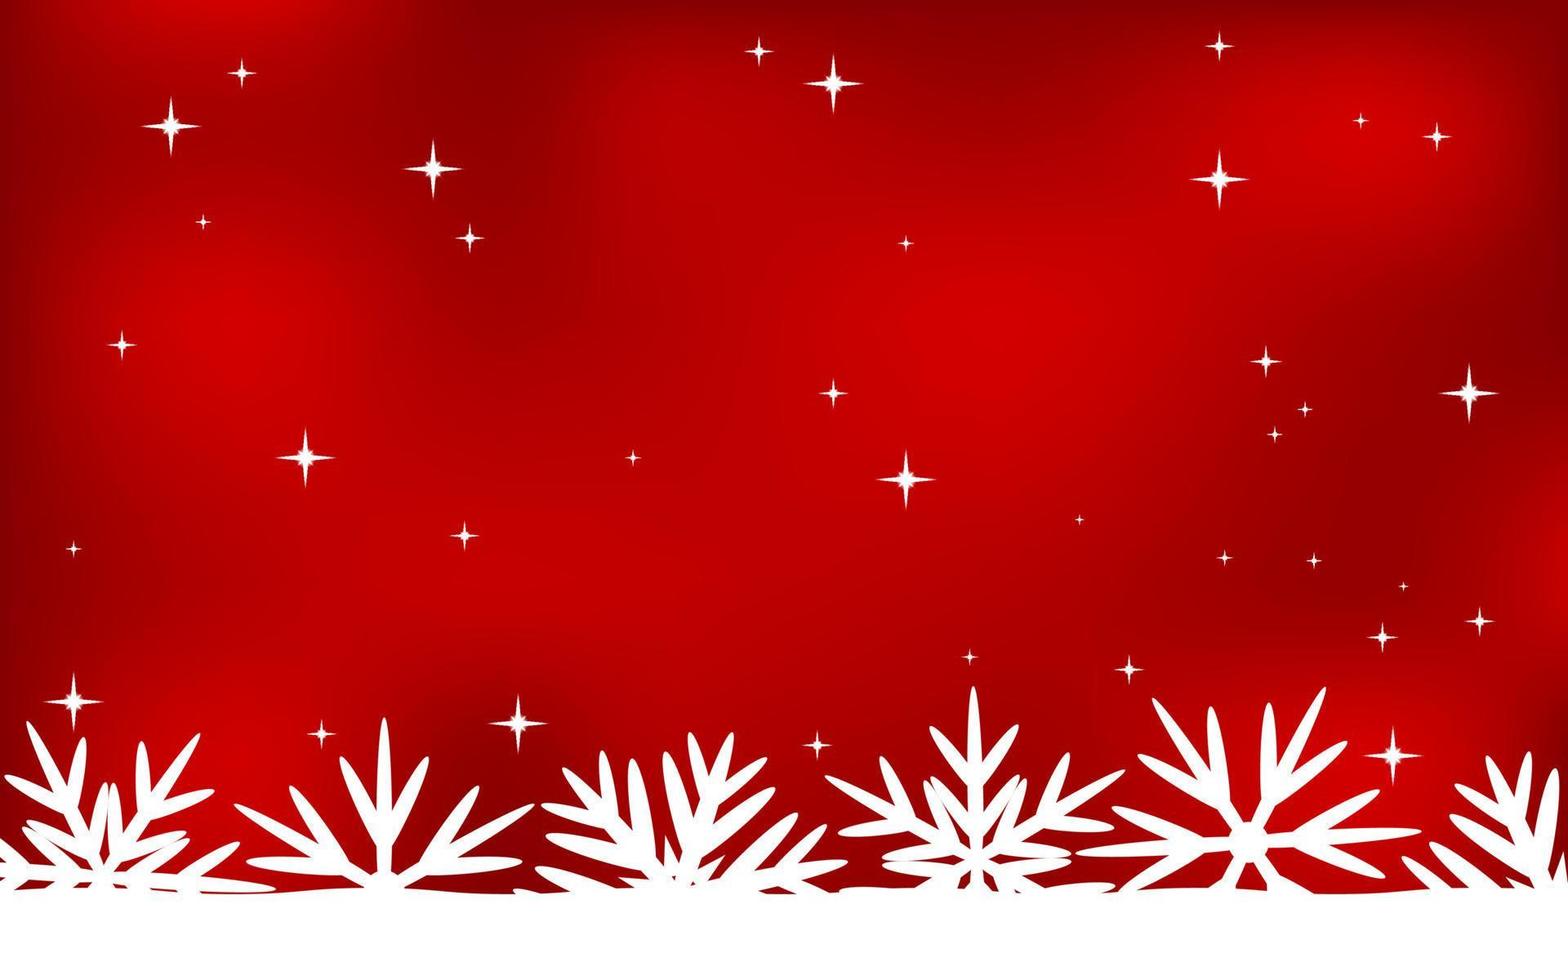 Christmas red background with snowflakes vector